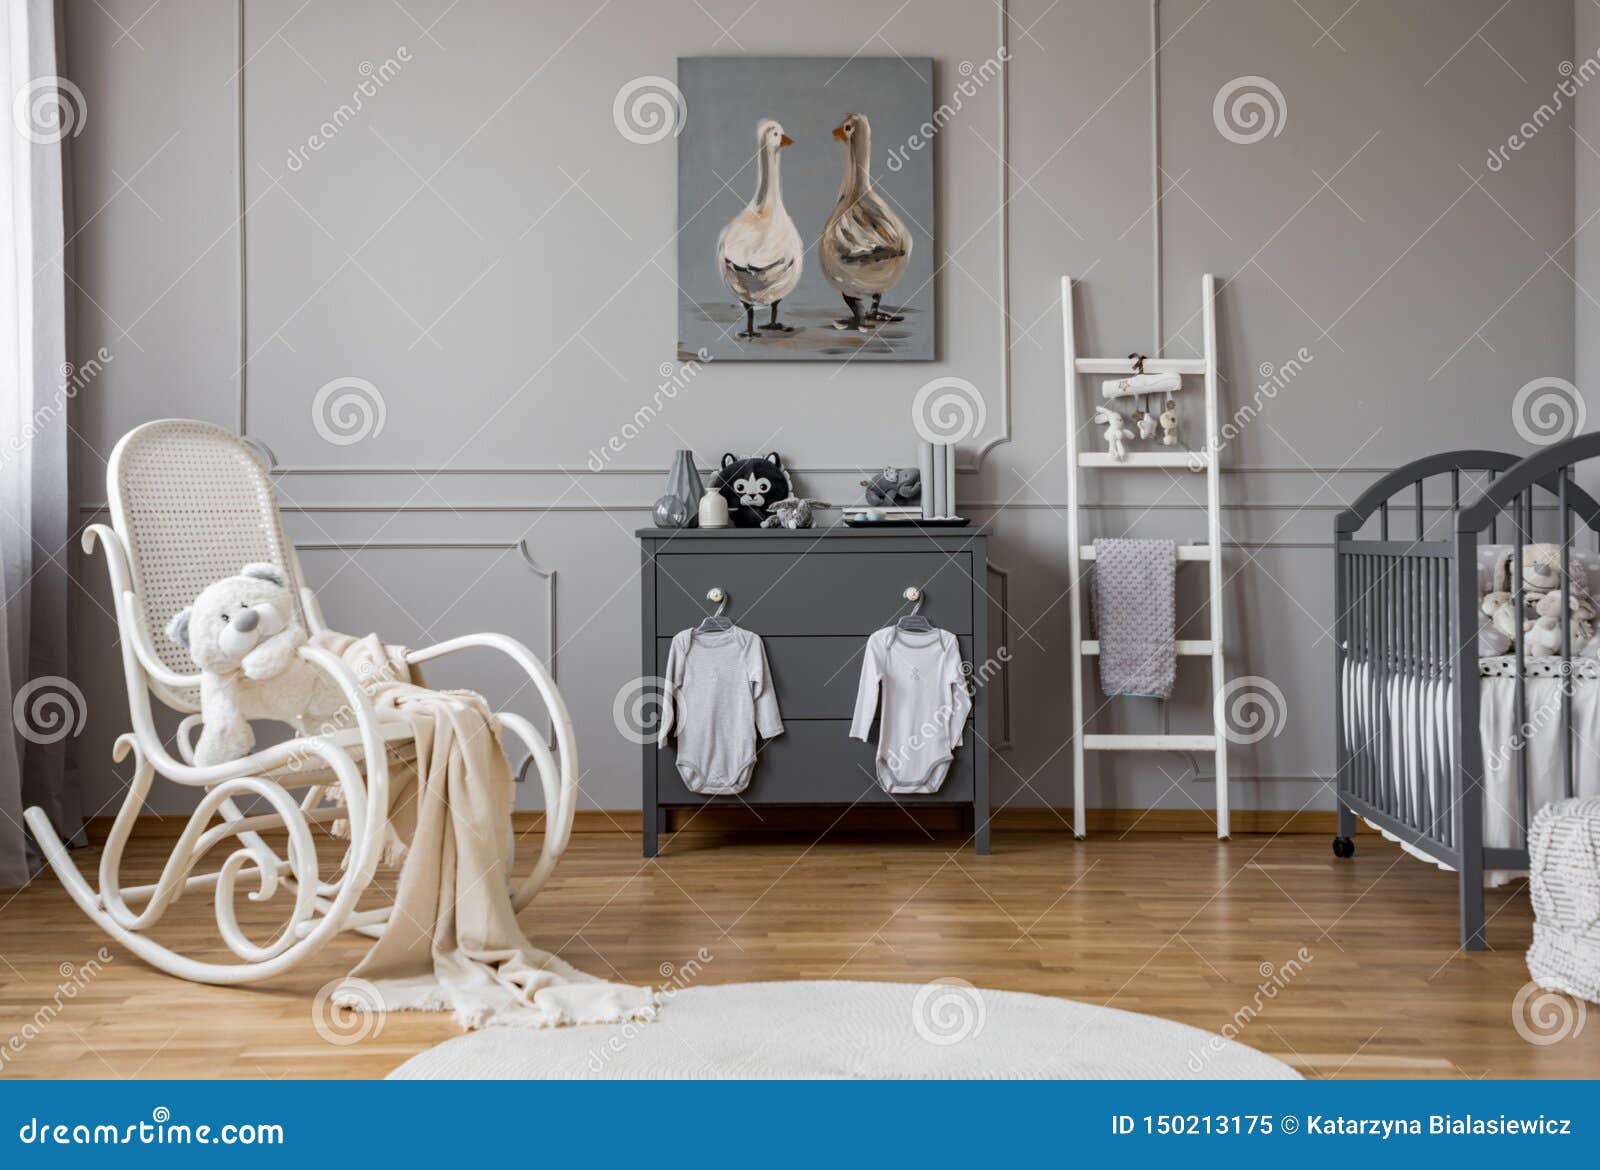 baby clothes hanging on knobs on grey wooden commode in lovely nursery, copy space and poster on empty wall